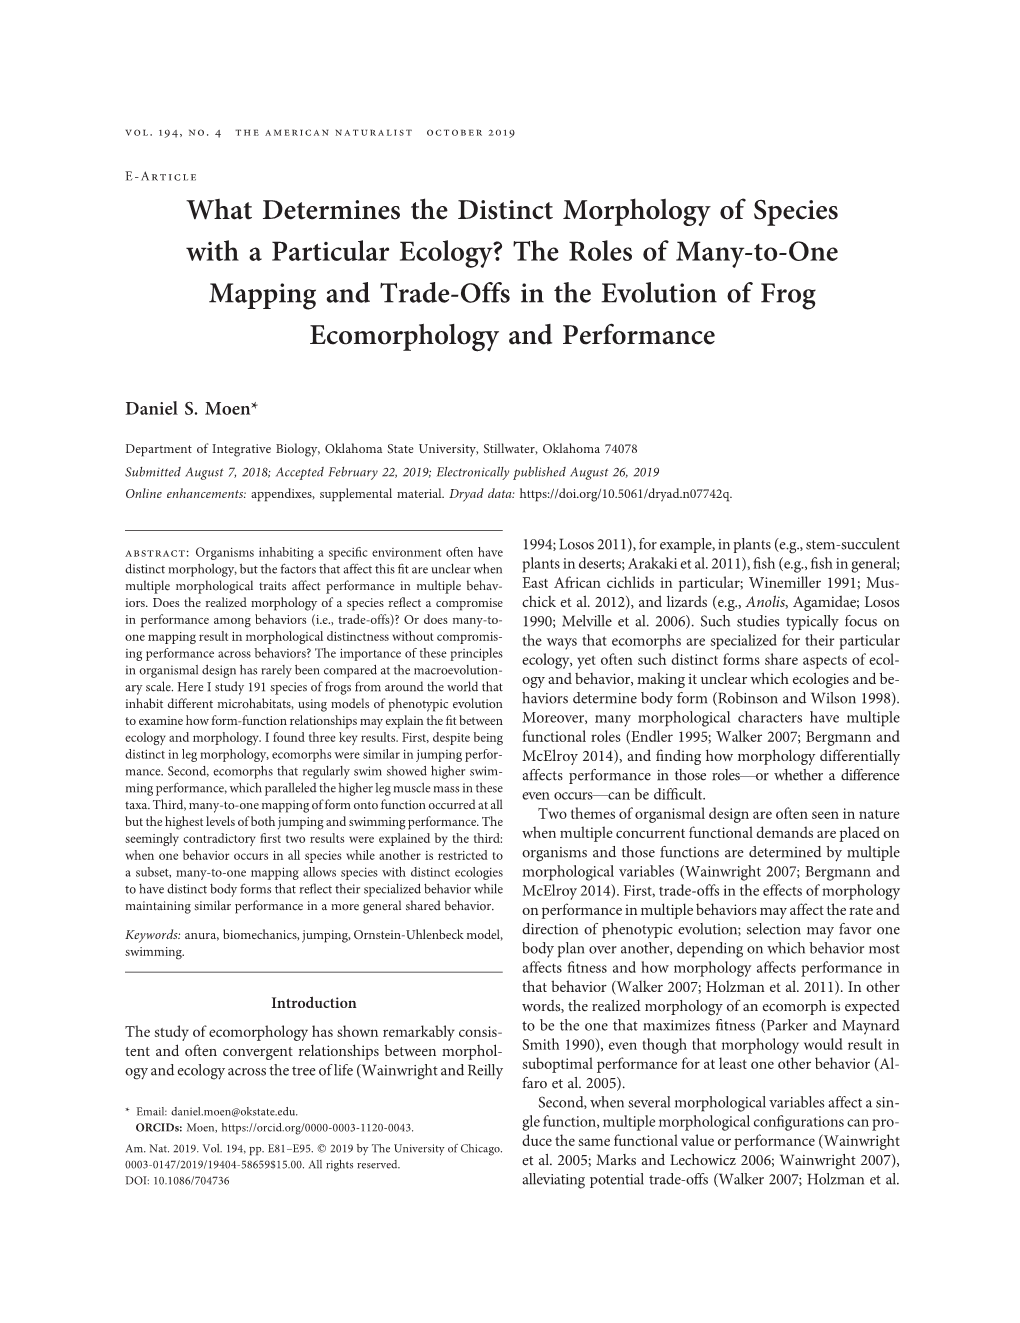 What Determines the Distinct Morphology of Species with A